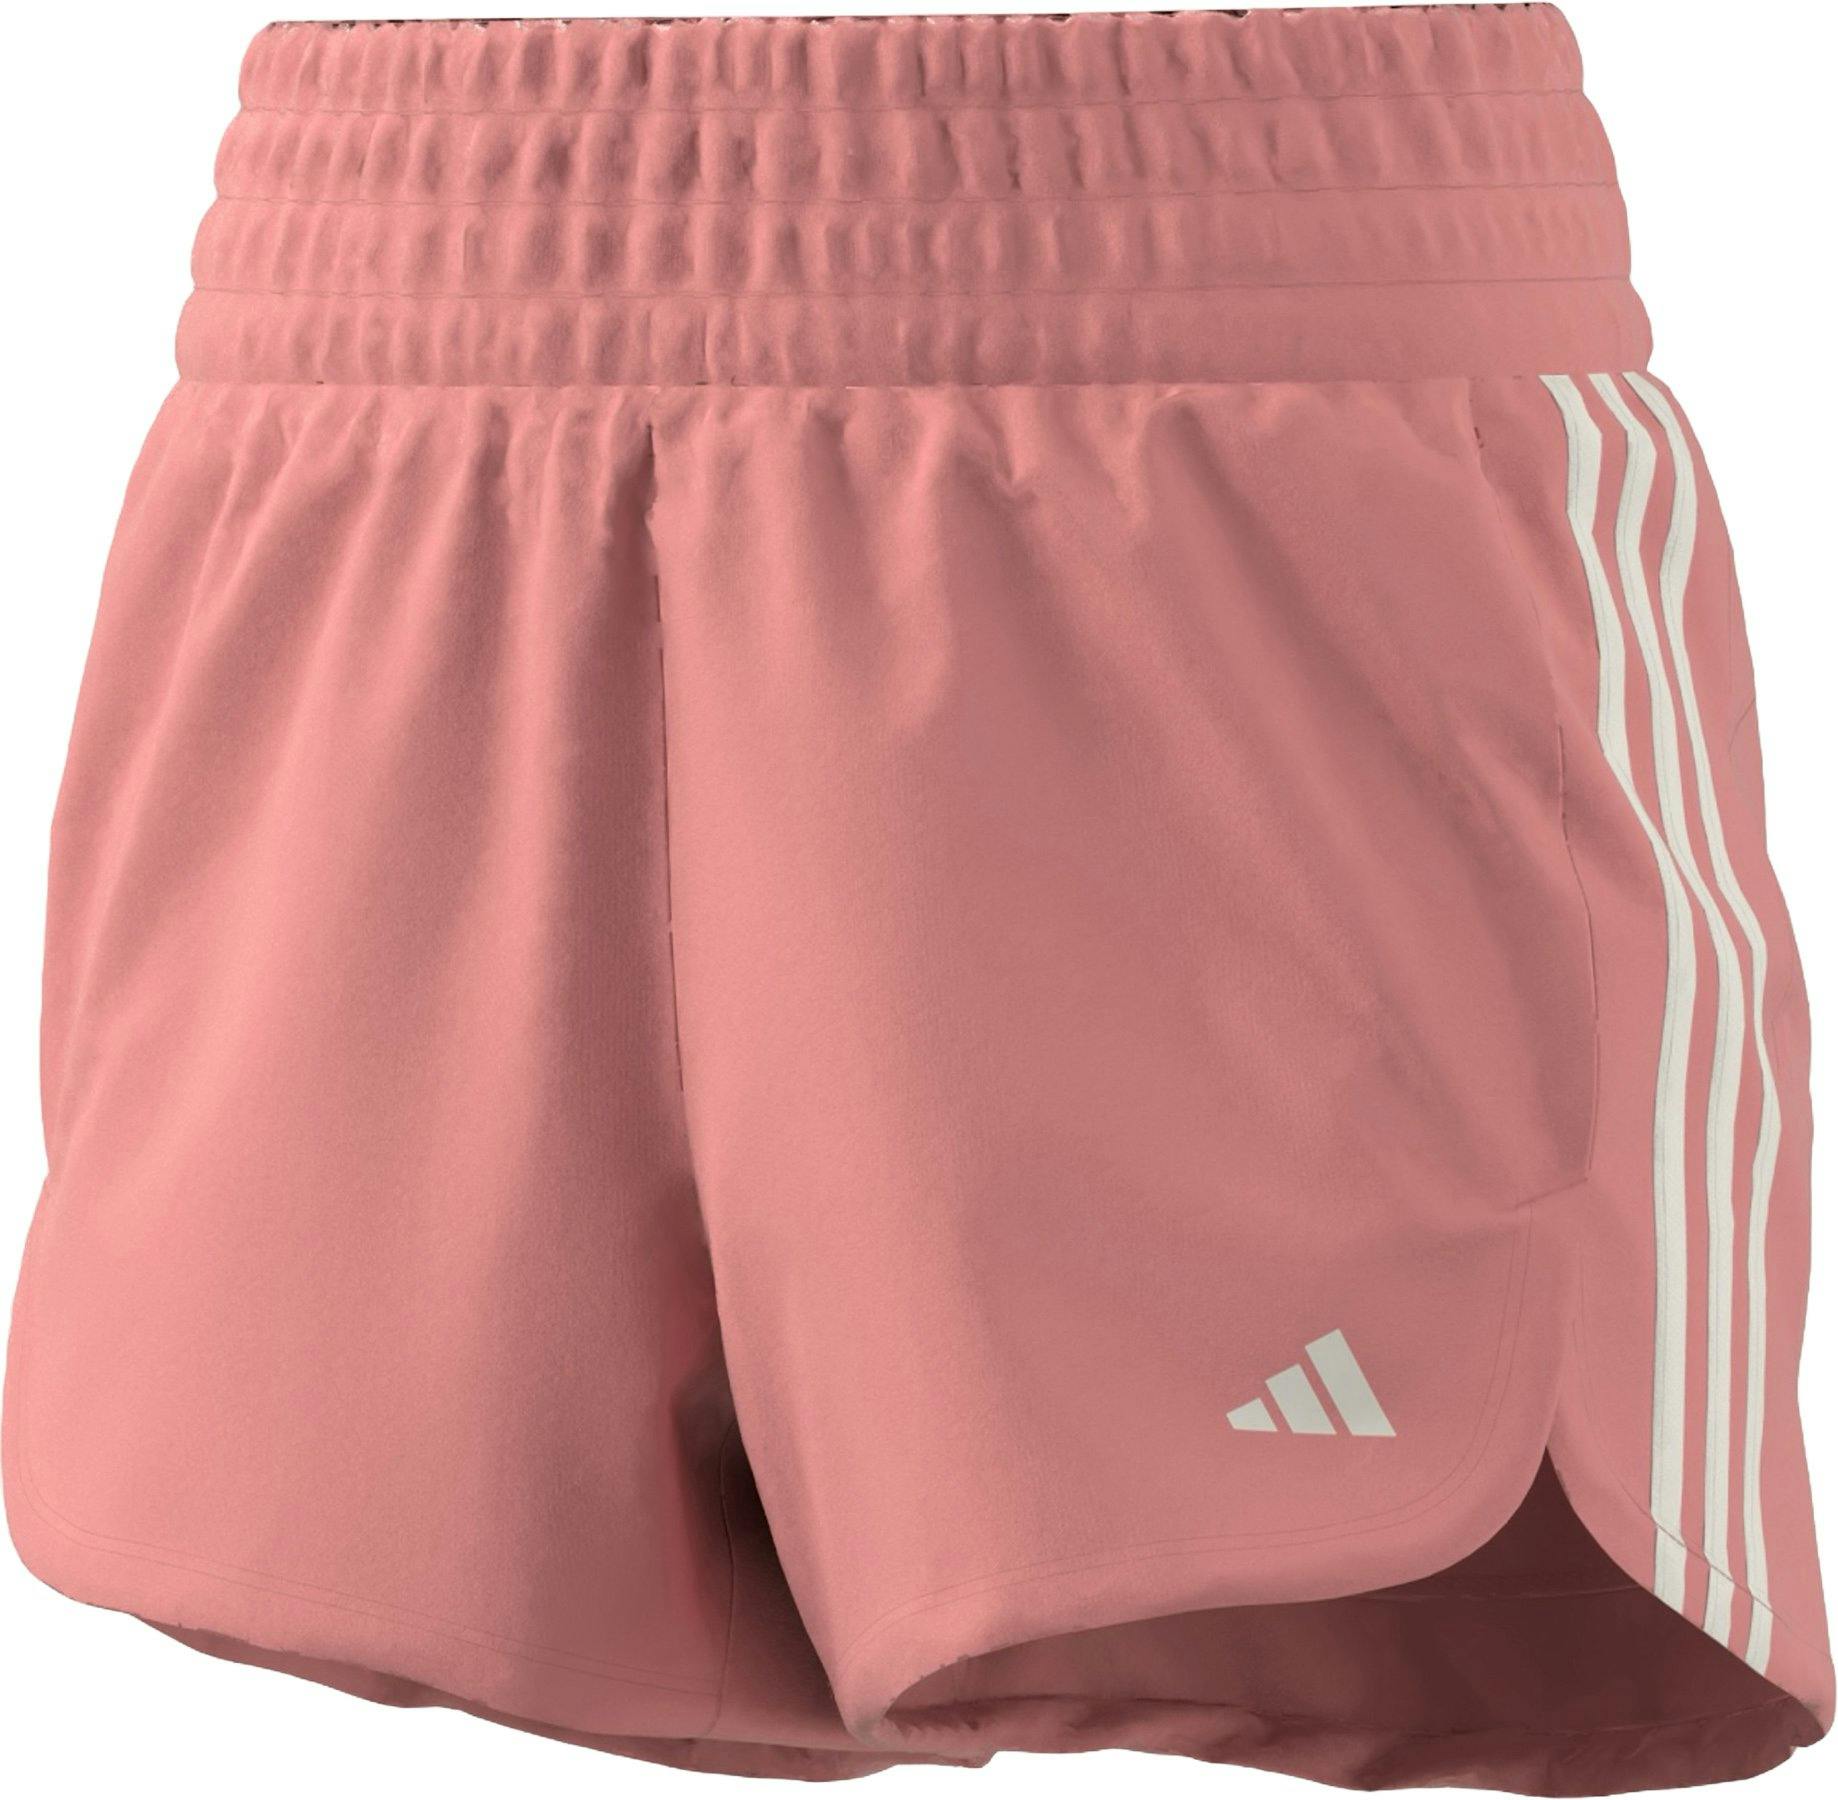 Product image for Pacer Training 3-Stripes Woven High-Rise Short - Women's